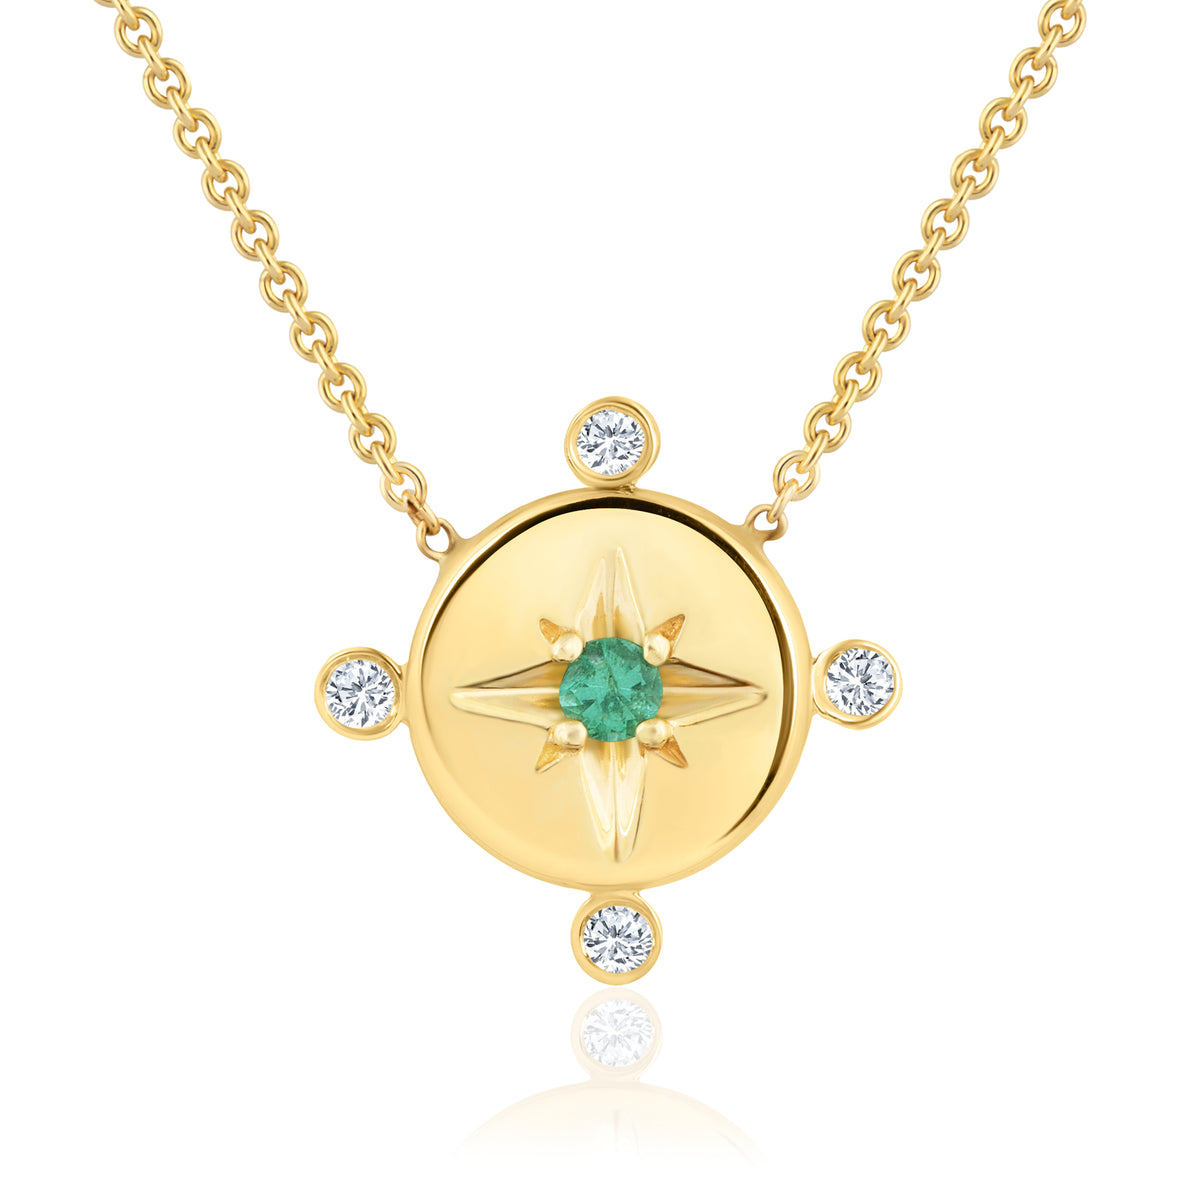 LUCKY STAR COMPASS NECKLACE